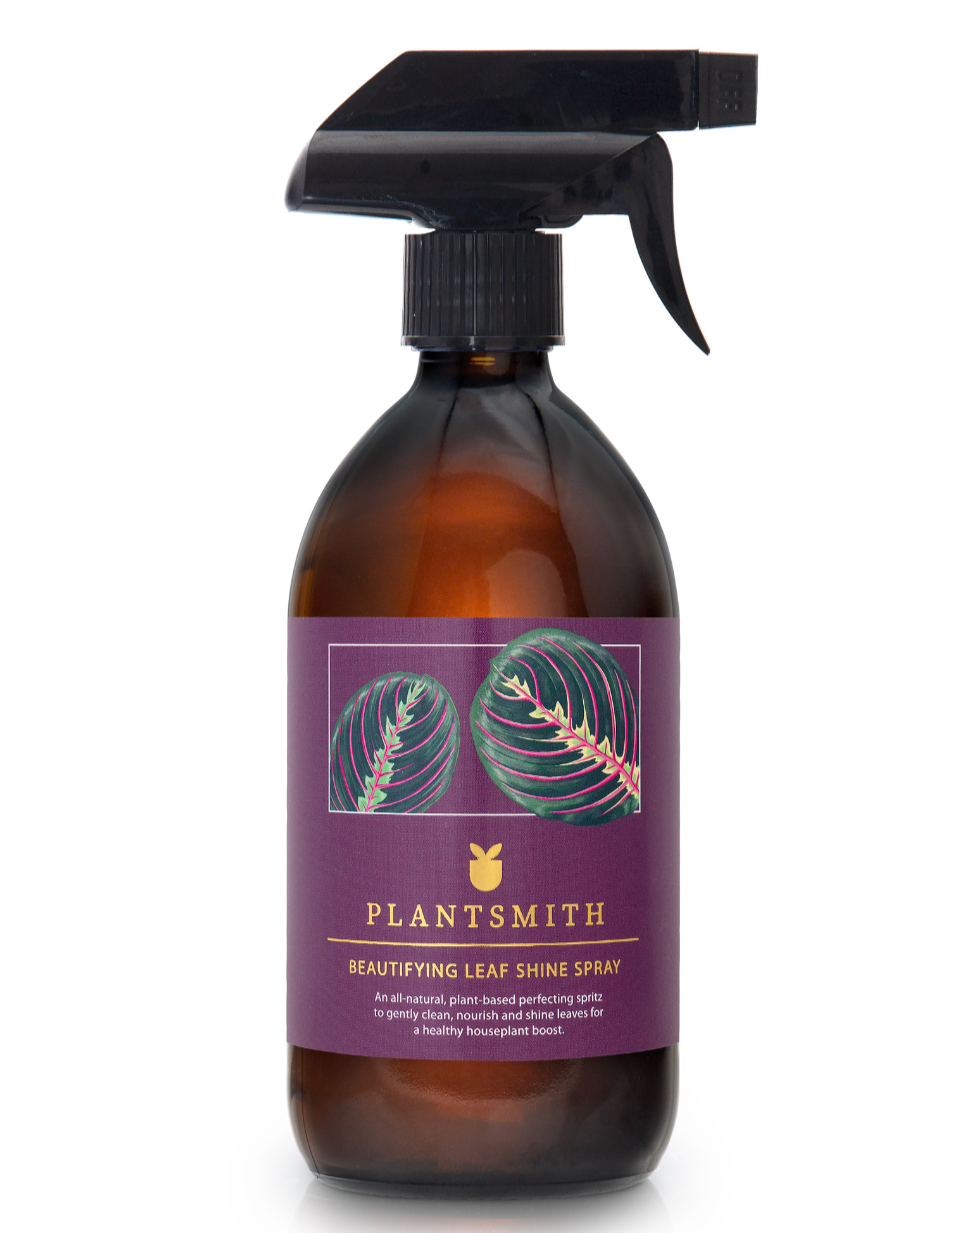 The Every Space natural Beautifying Leaf Shine Spray in glass bottle to clean and shine leaves, with cold-pressed oils and grapefruit by Plantsmith